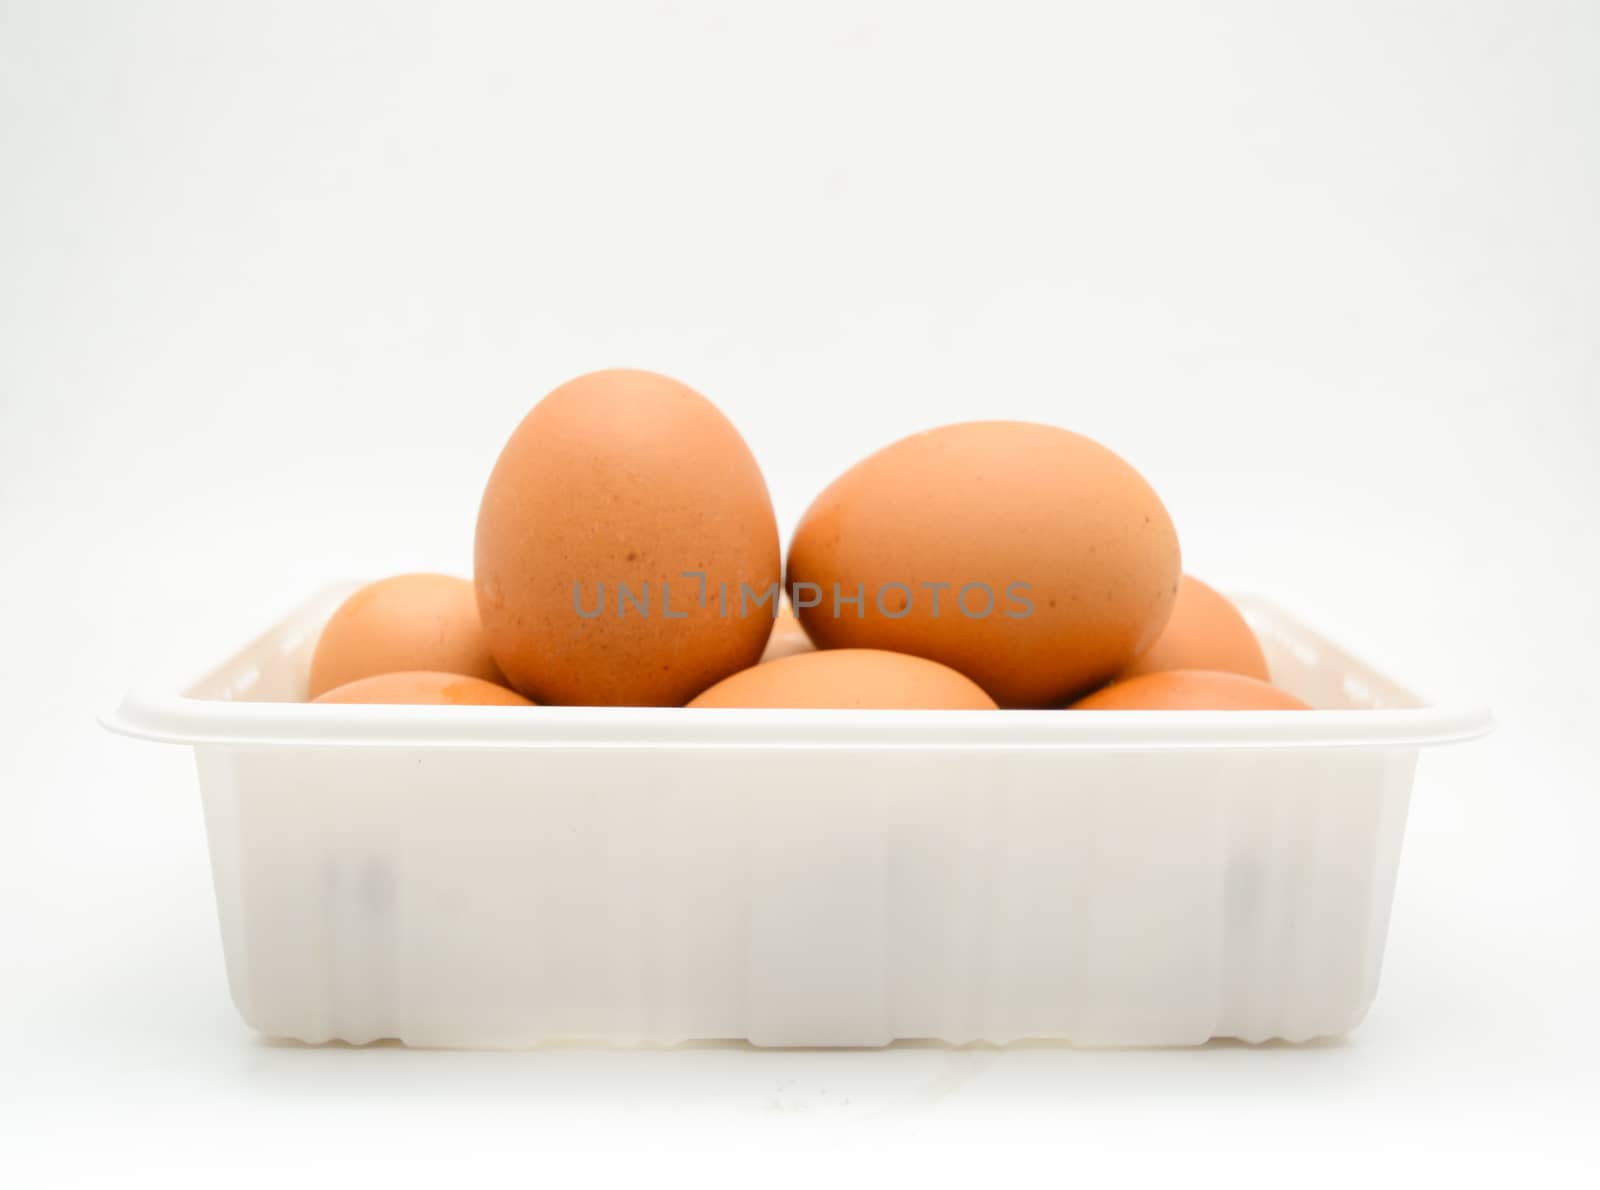 Eggs, fresh brown eggs in the white plastic box by yuiyuize